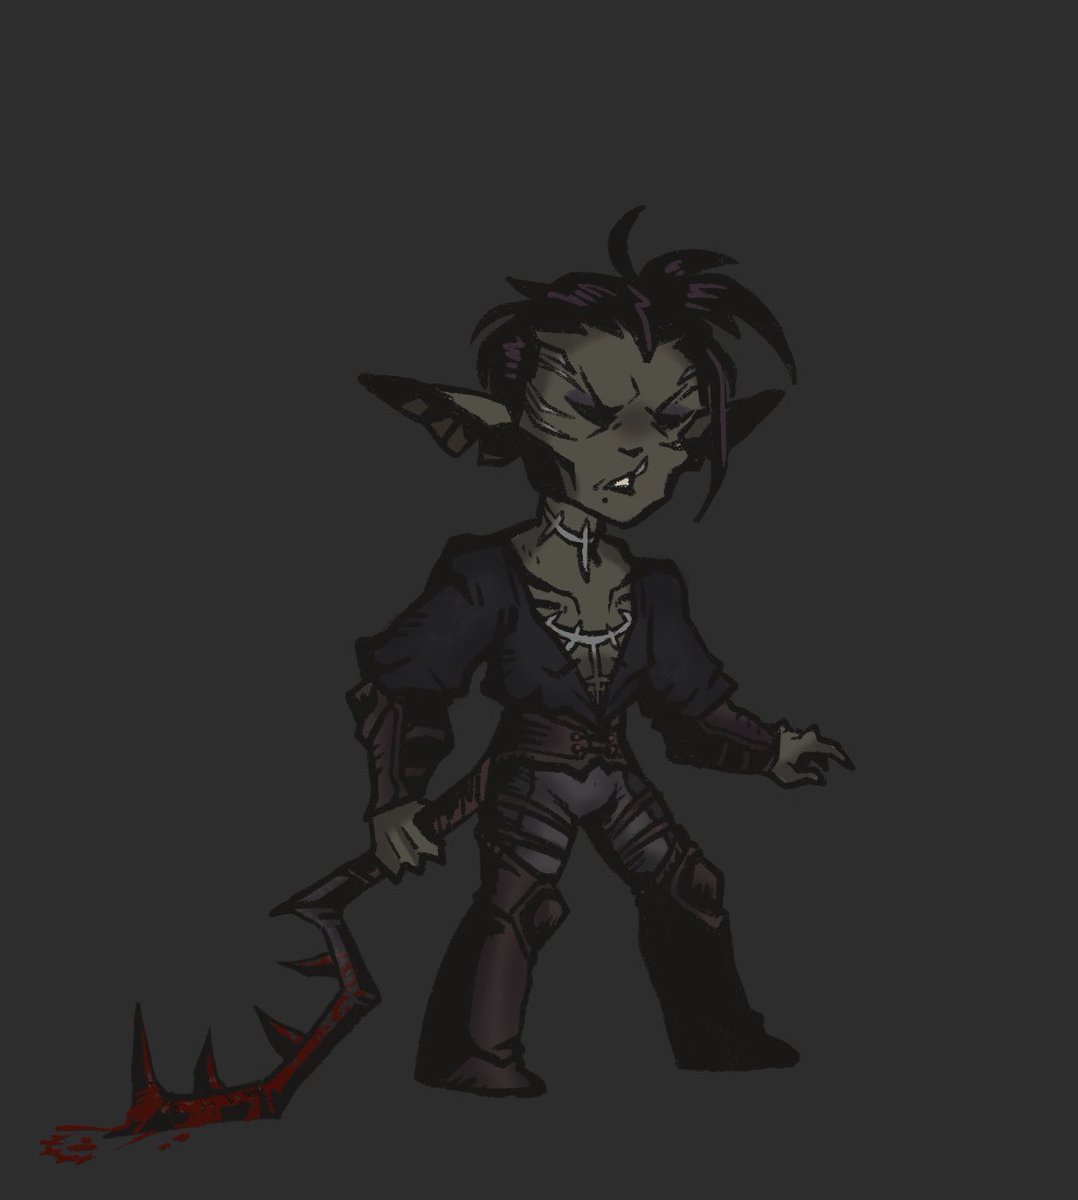 Did a fun stylize practice and drew Enid in the Darkest Dungeon sprite style! It was a fun experiment and I adore the heavy shading of DD.